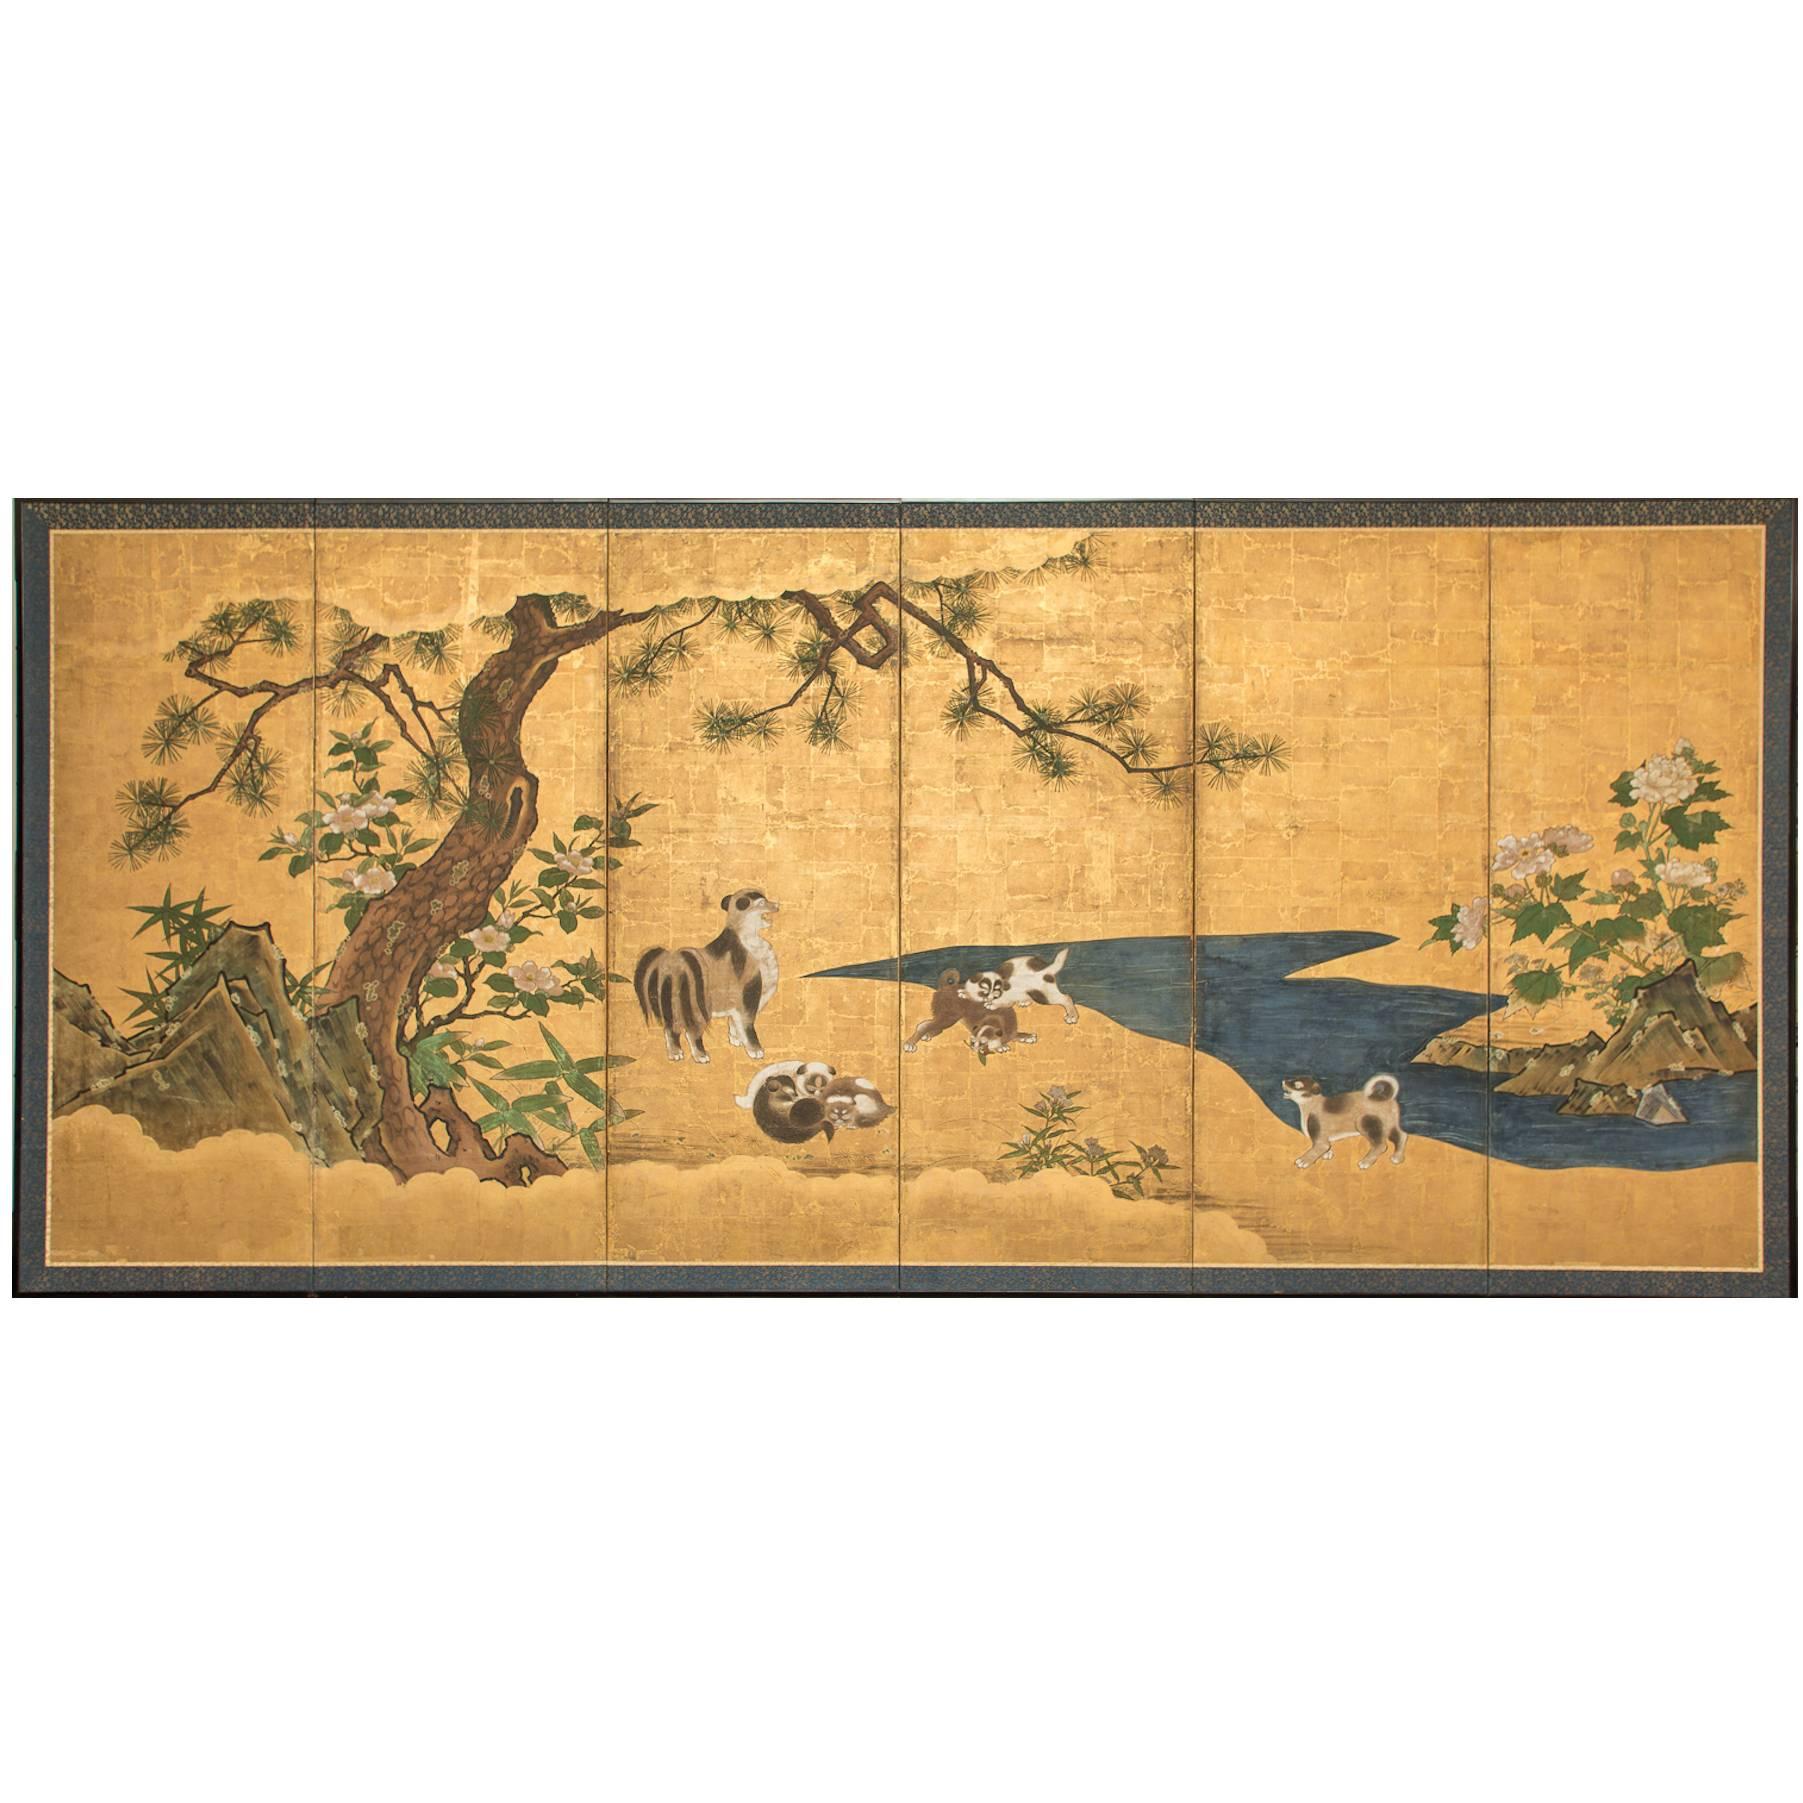 The first screen is depicting a mother watching her young frolicking under pine tree by river's edge, the second, a mother and her young playing under a flowering cherry tree by river's edge. Both screens are Kano School, with beautiful early bronze